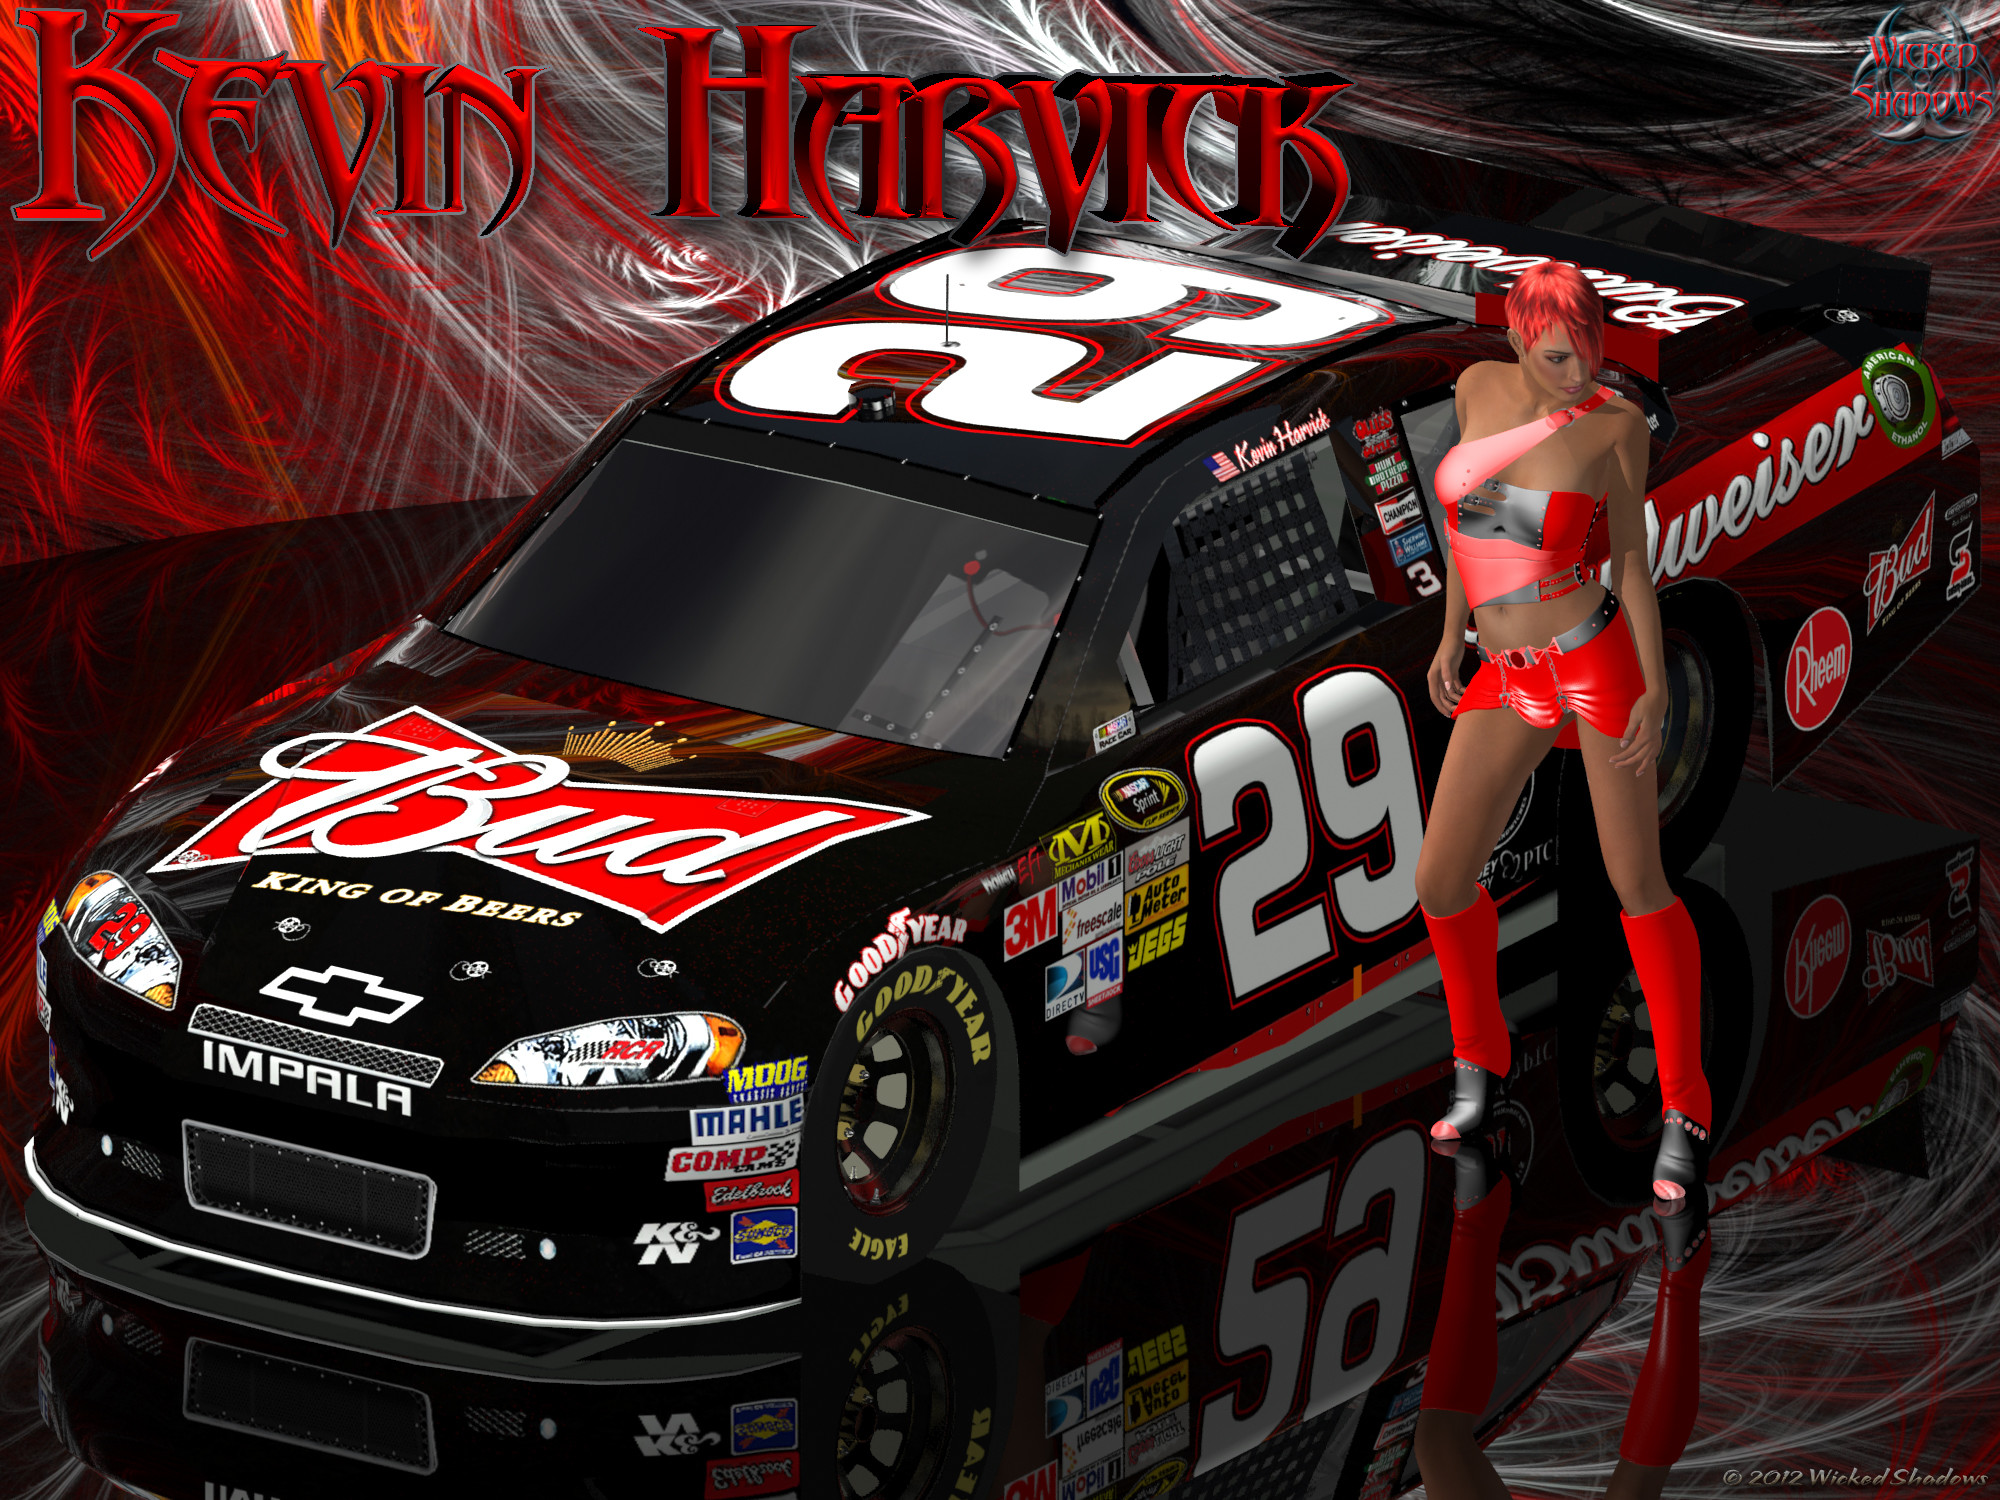 2000x1500 Facebook Cover Photo | Android | 4x3 | 5x4 | 16x9 | 16x10. Kevin Harvick  Lady In Red Wallpaper ...